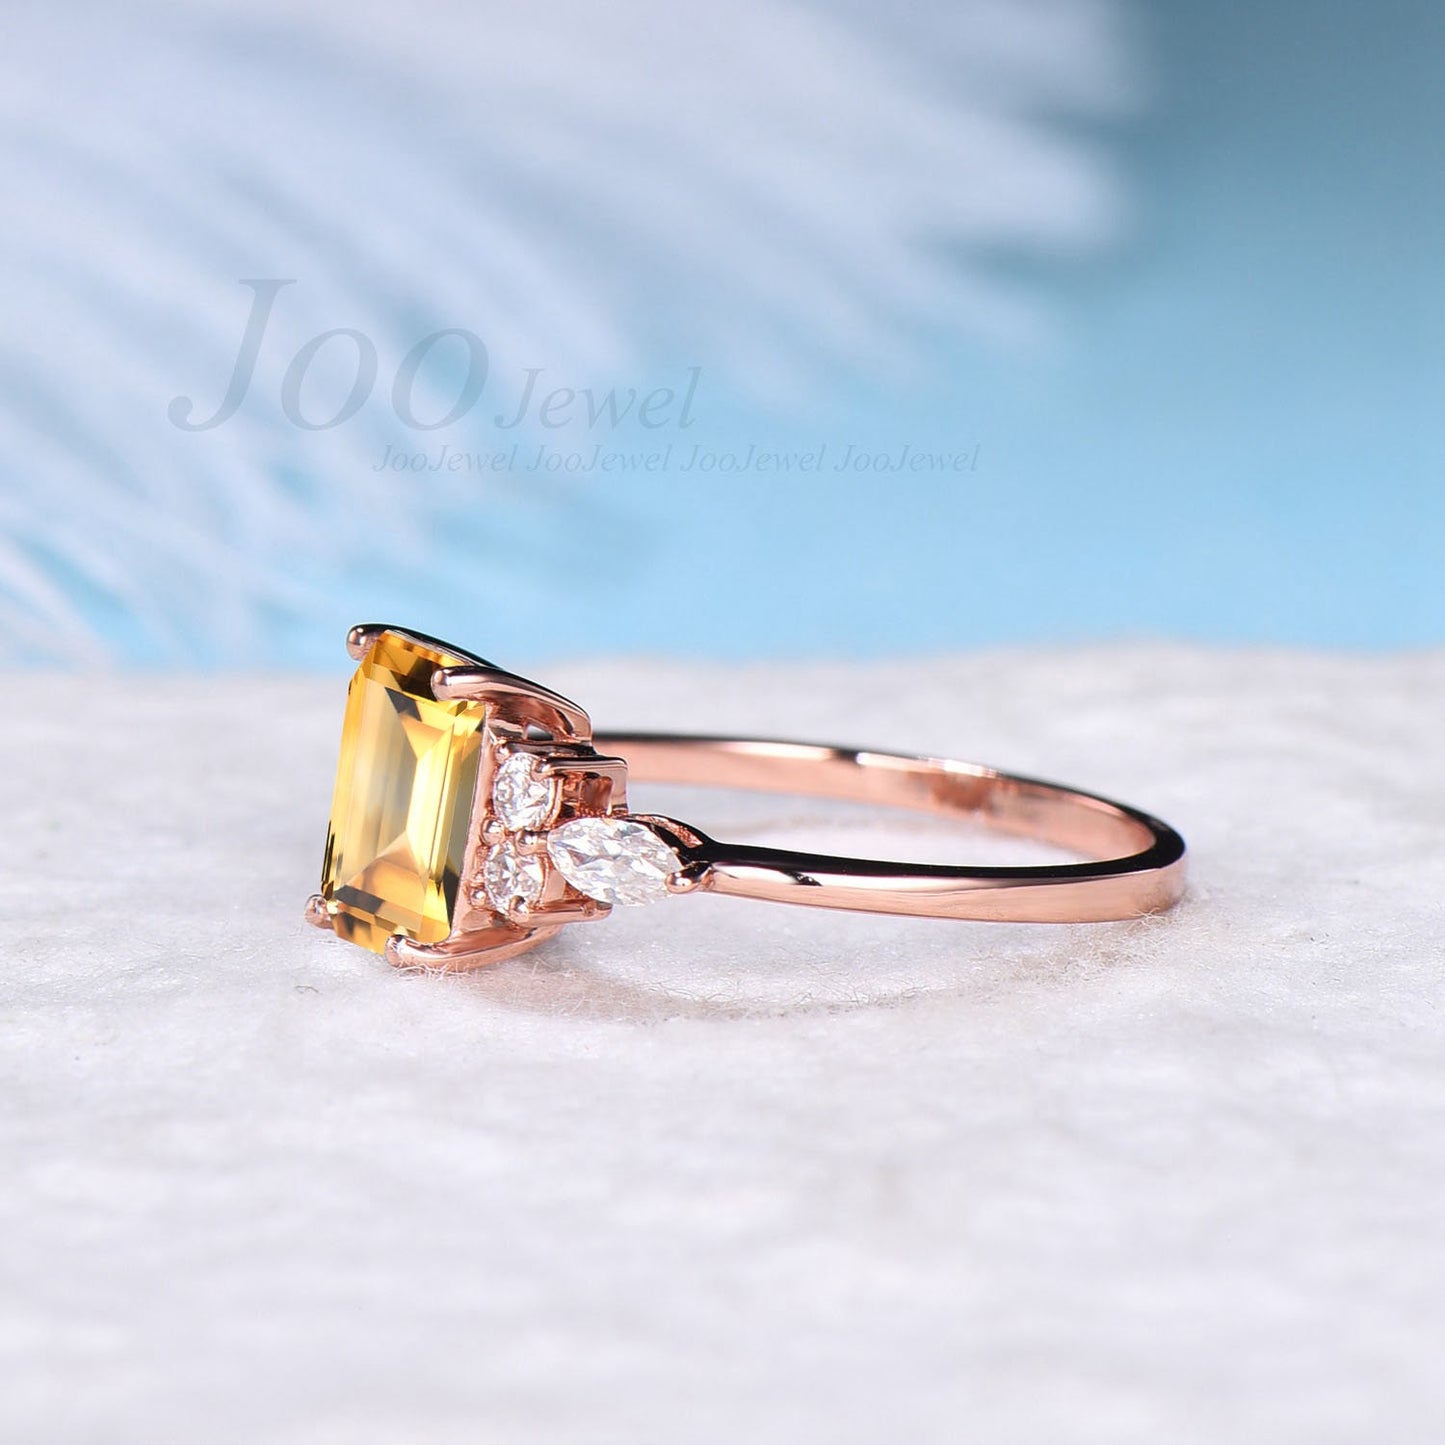 Emerald Cut Natural Citrine Ring Vintage 2ct Citrine Wedding Ring Sterling Silver Gold Citrine Engagement Ring November Birthstone Jewelry